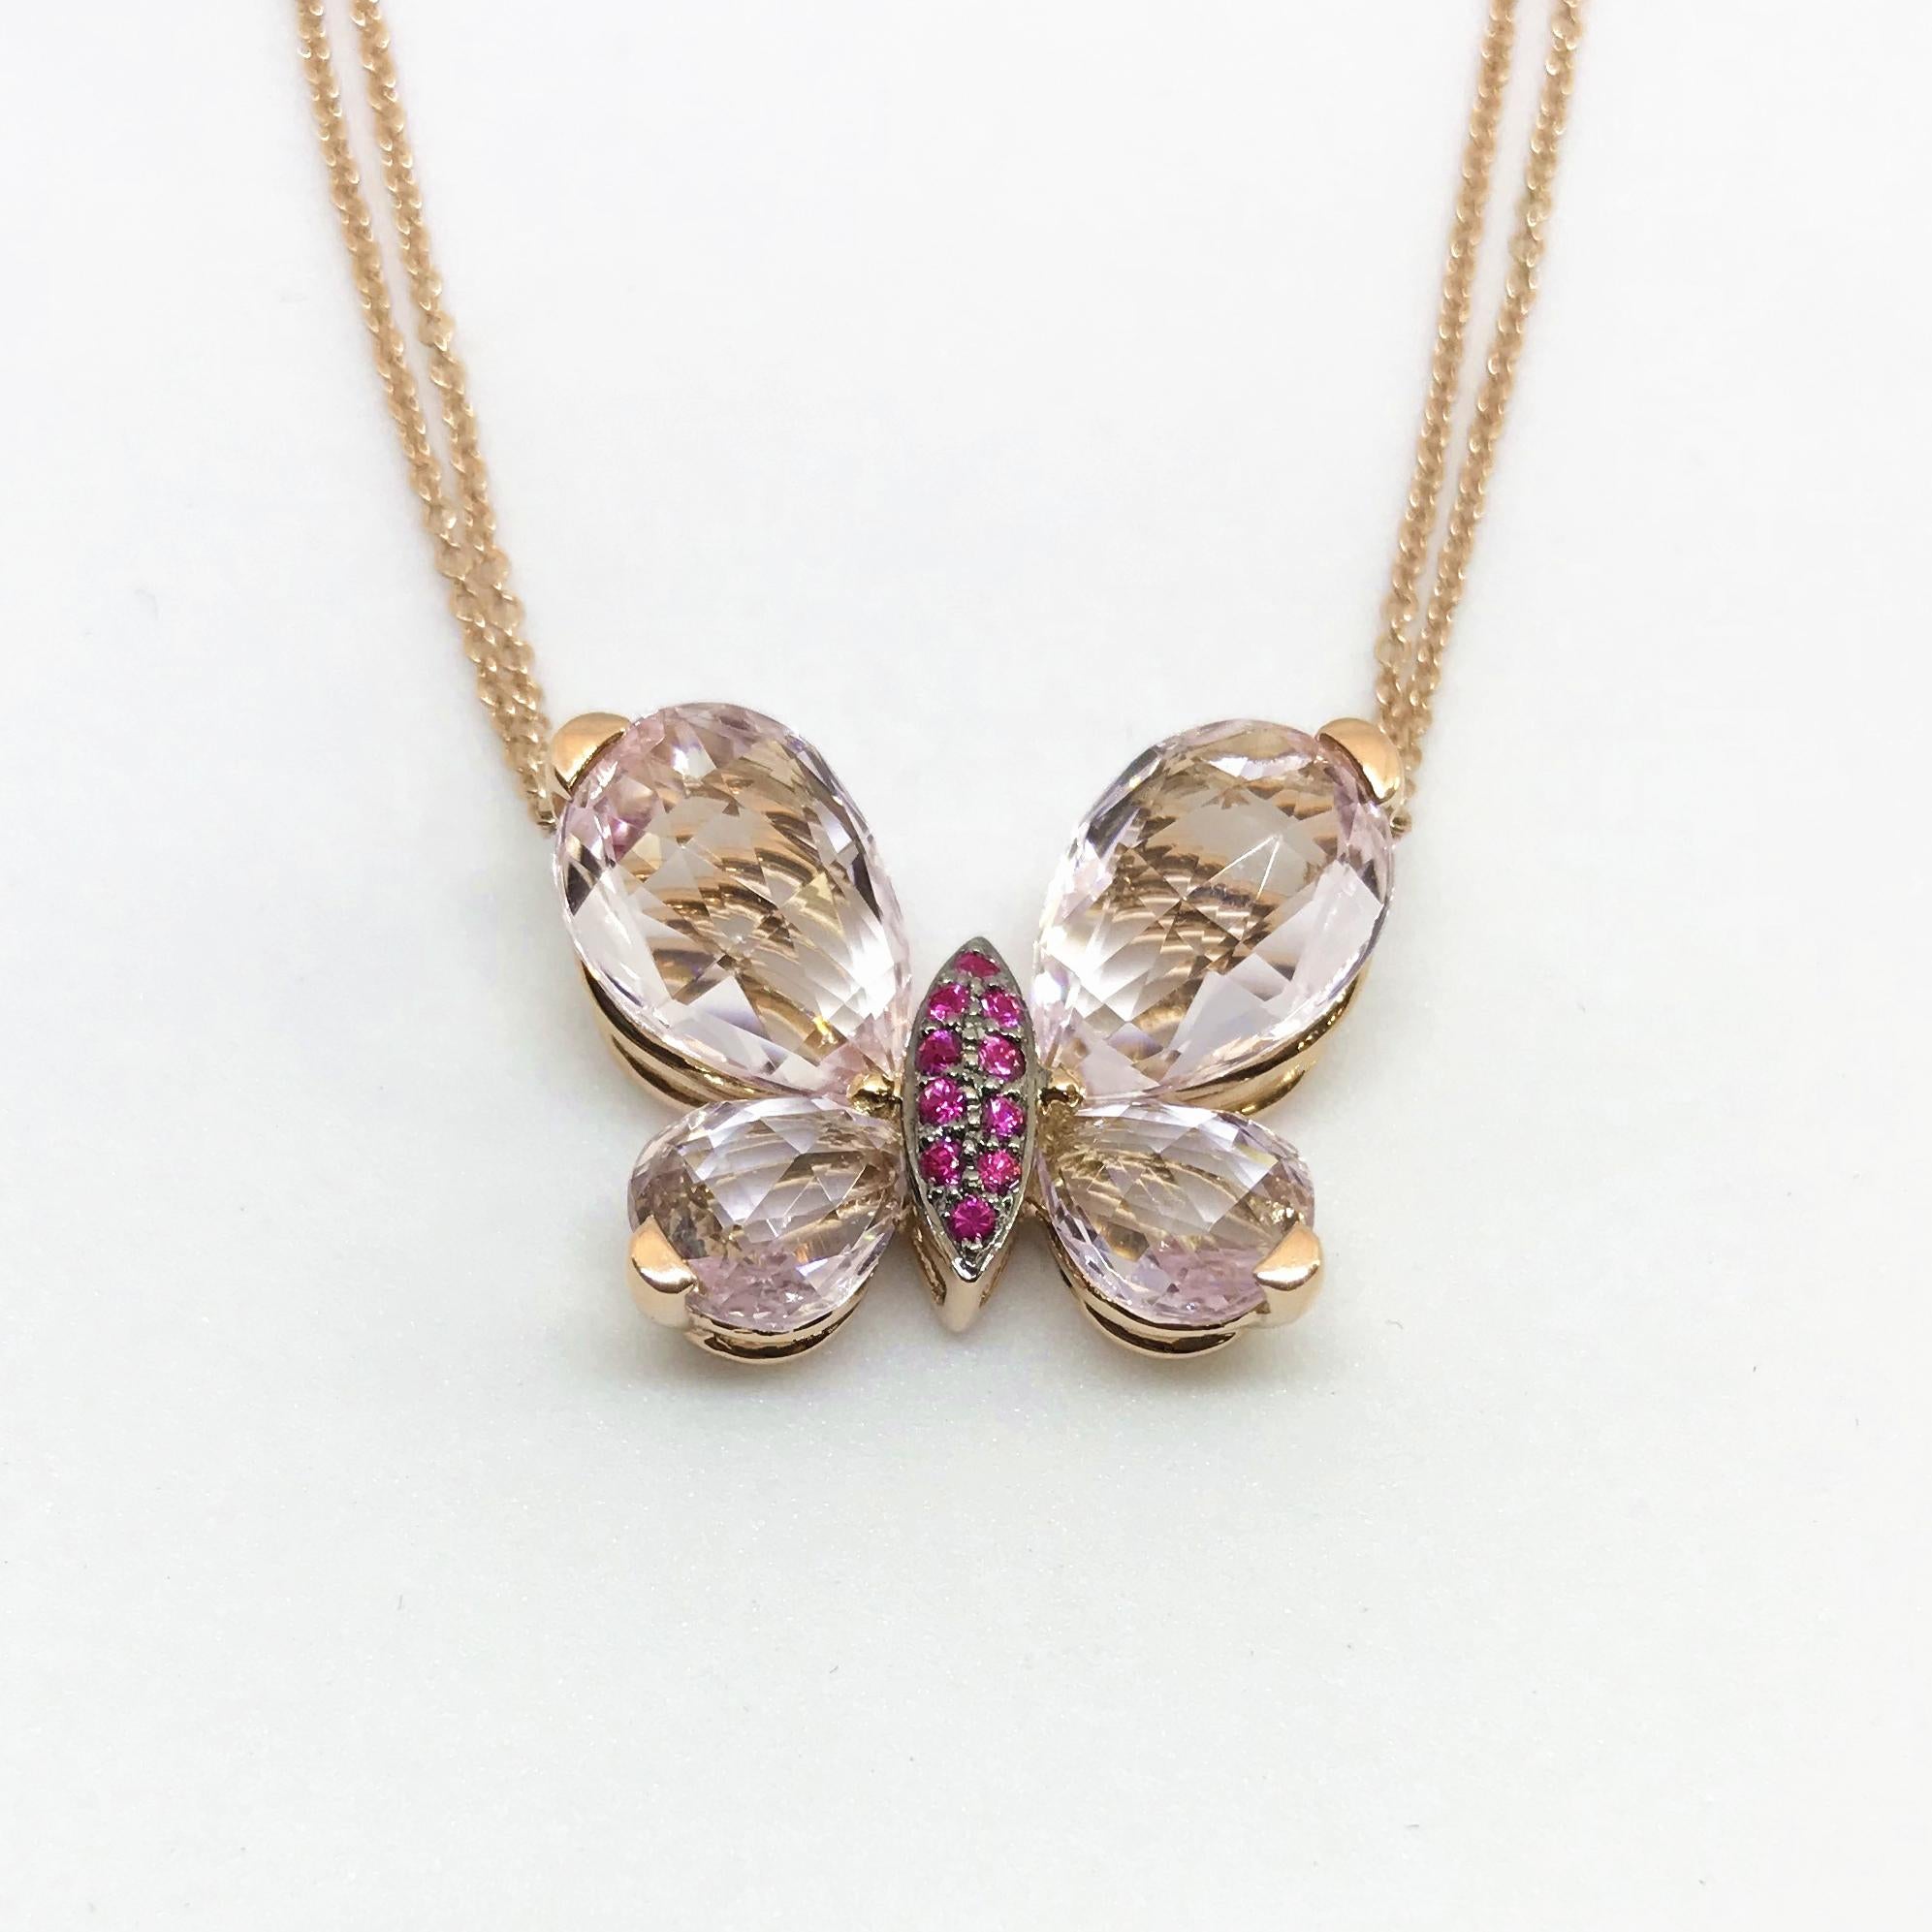 18K Rose Gold Butterfly Pendant with one pair of pear-shaped morganites (5.05 cts), one pair of pear-shaped amethysts (2.48 cts) making up its wings, and 10 small round pink sapphires set on its center body. It is stamped 750 on its back. It is